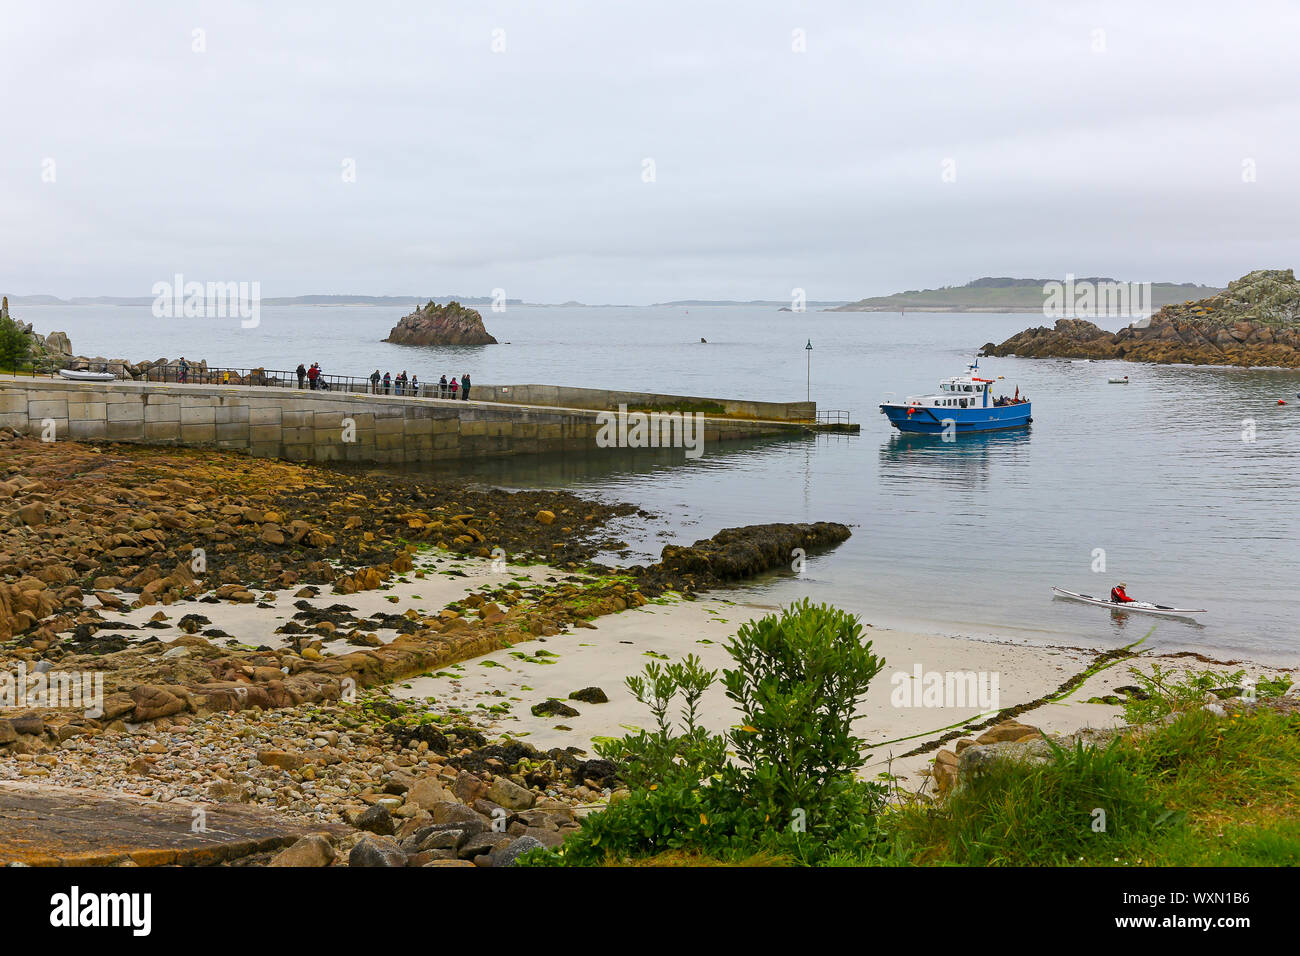 St. Agnes Insel, Isles of Scilly, Cornwall, England, Großbritannien Stockfoto